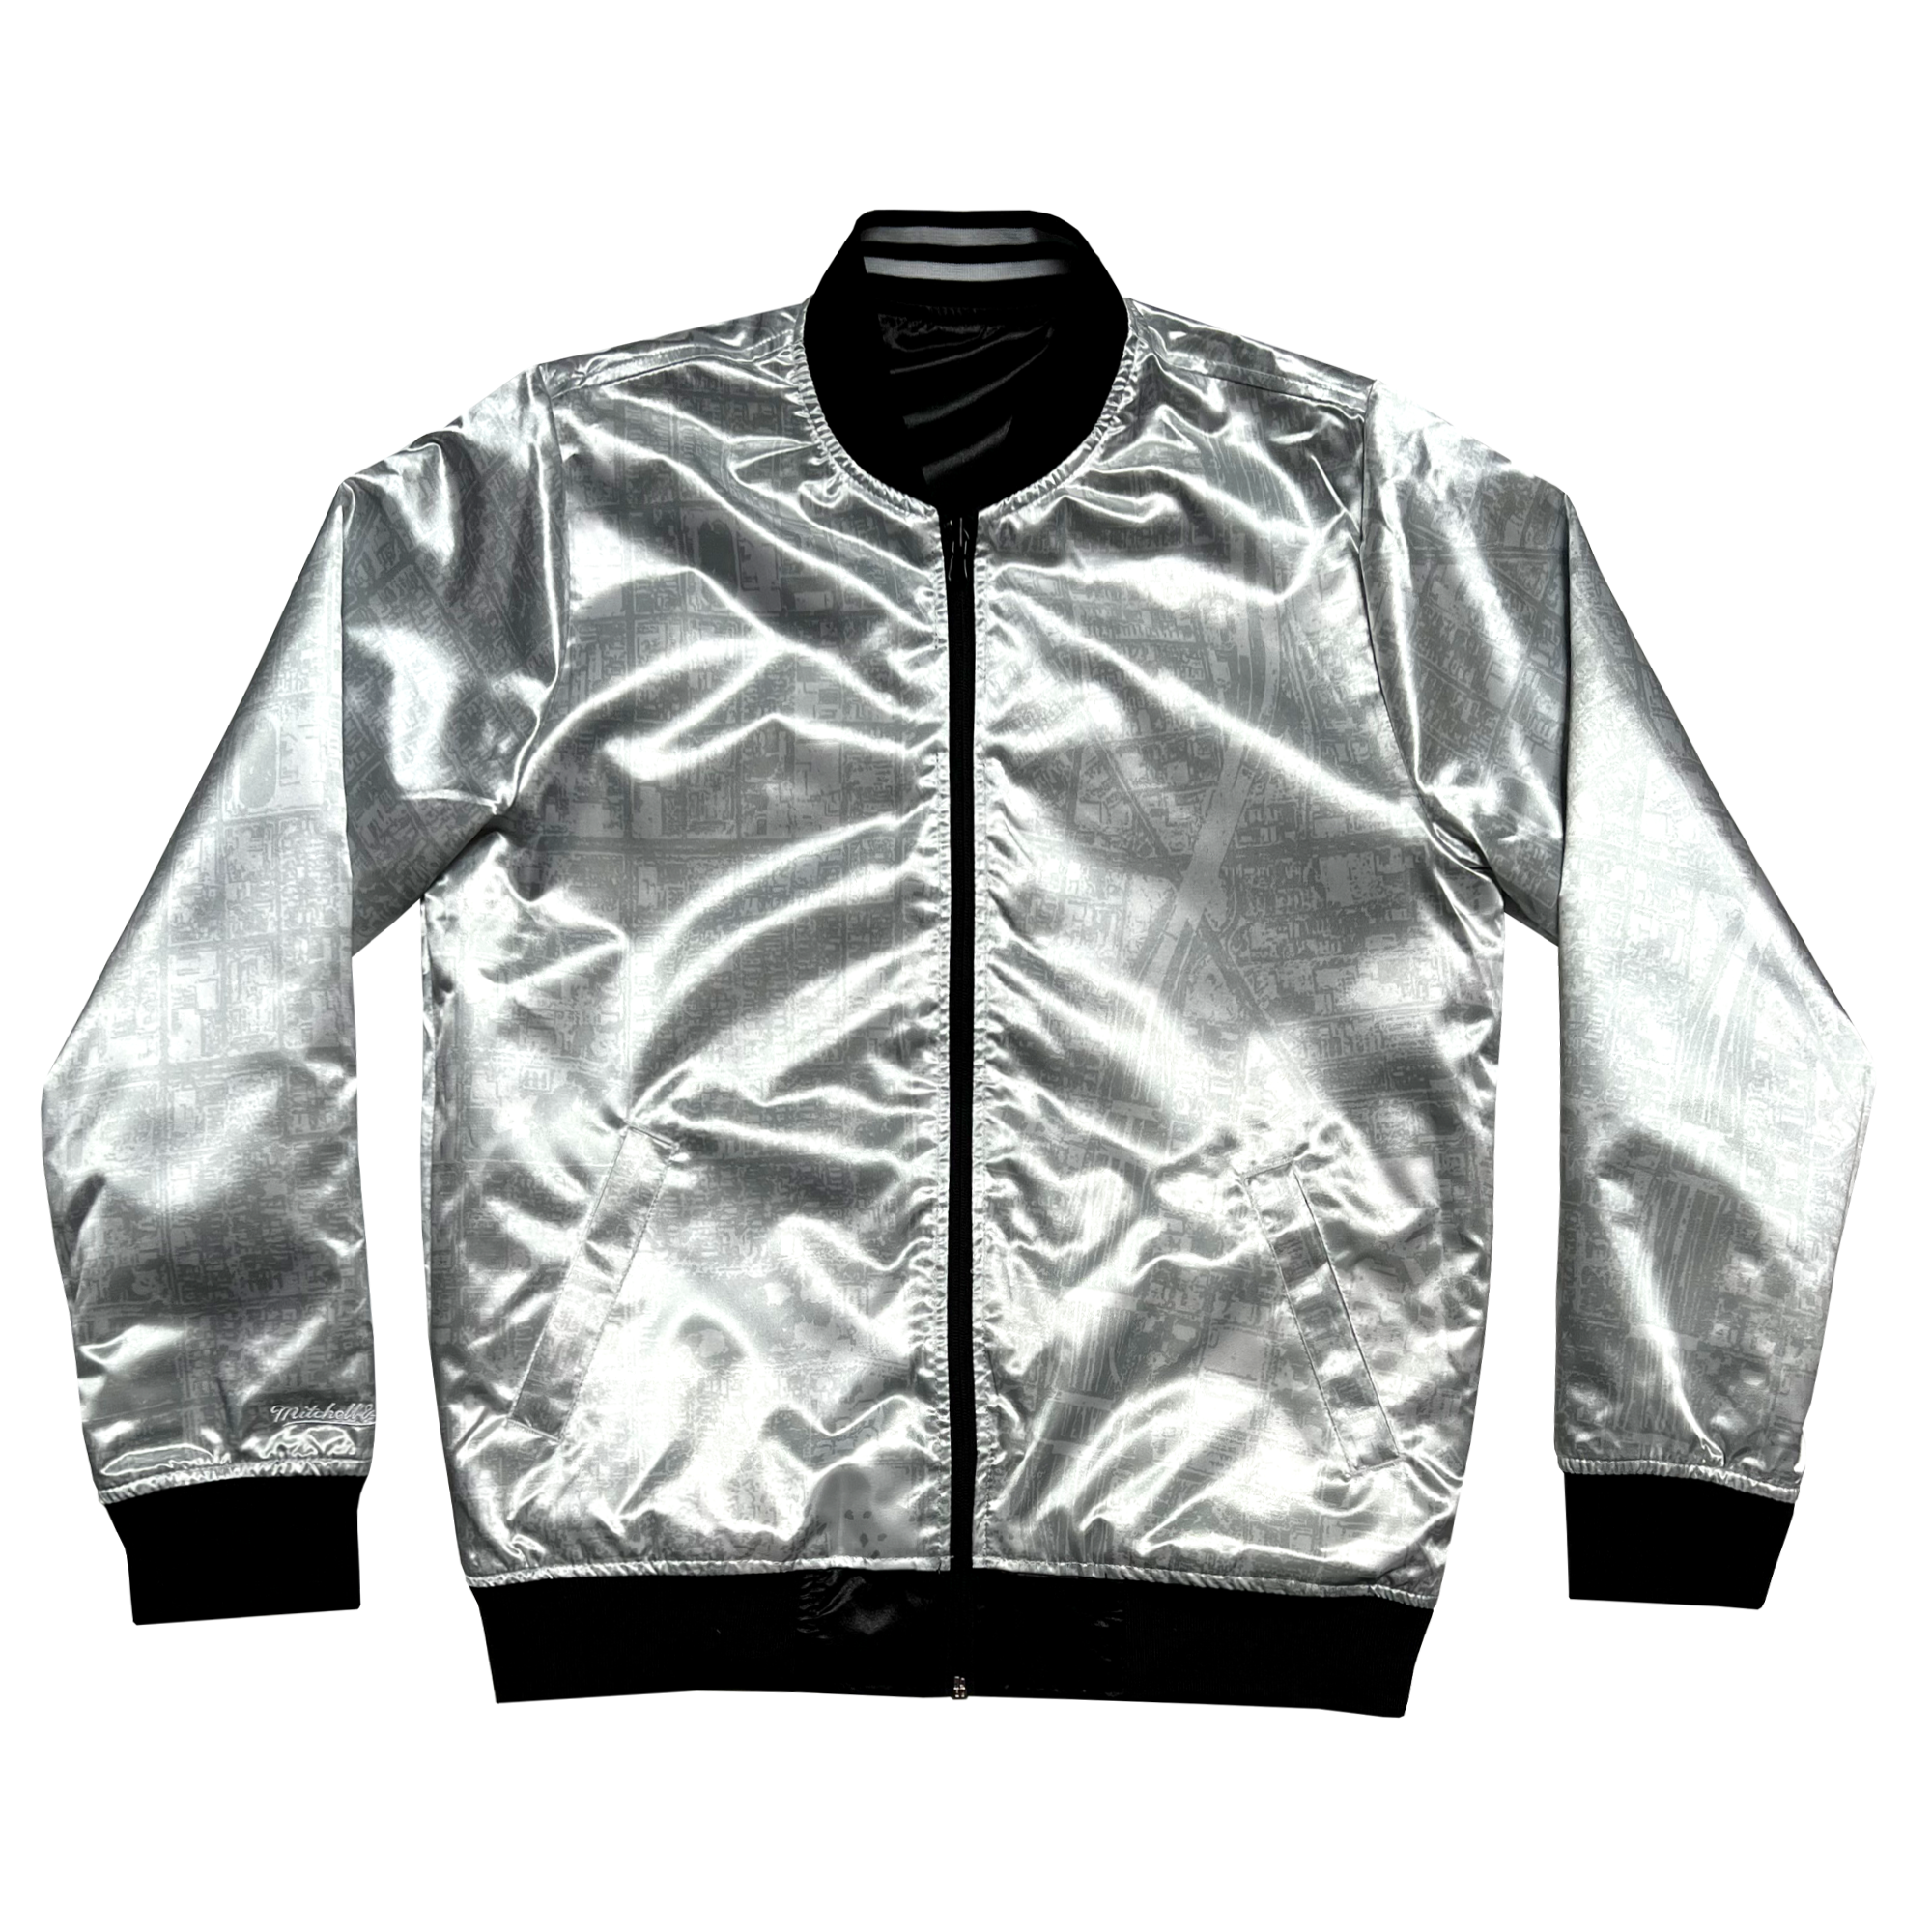 Front view of the silver reverse side of a satin jacket, imprinted with an aerial map of Oakland.